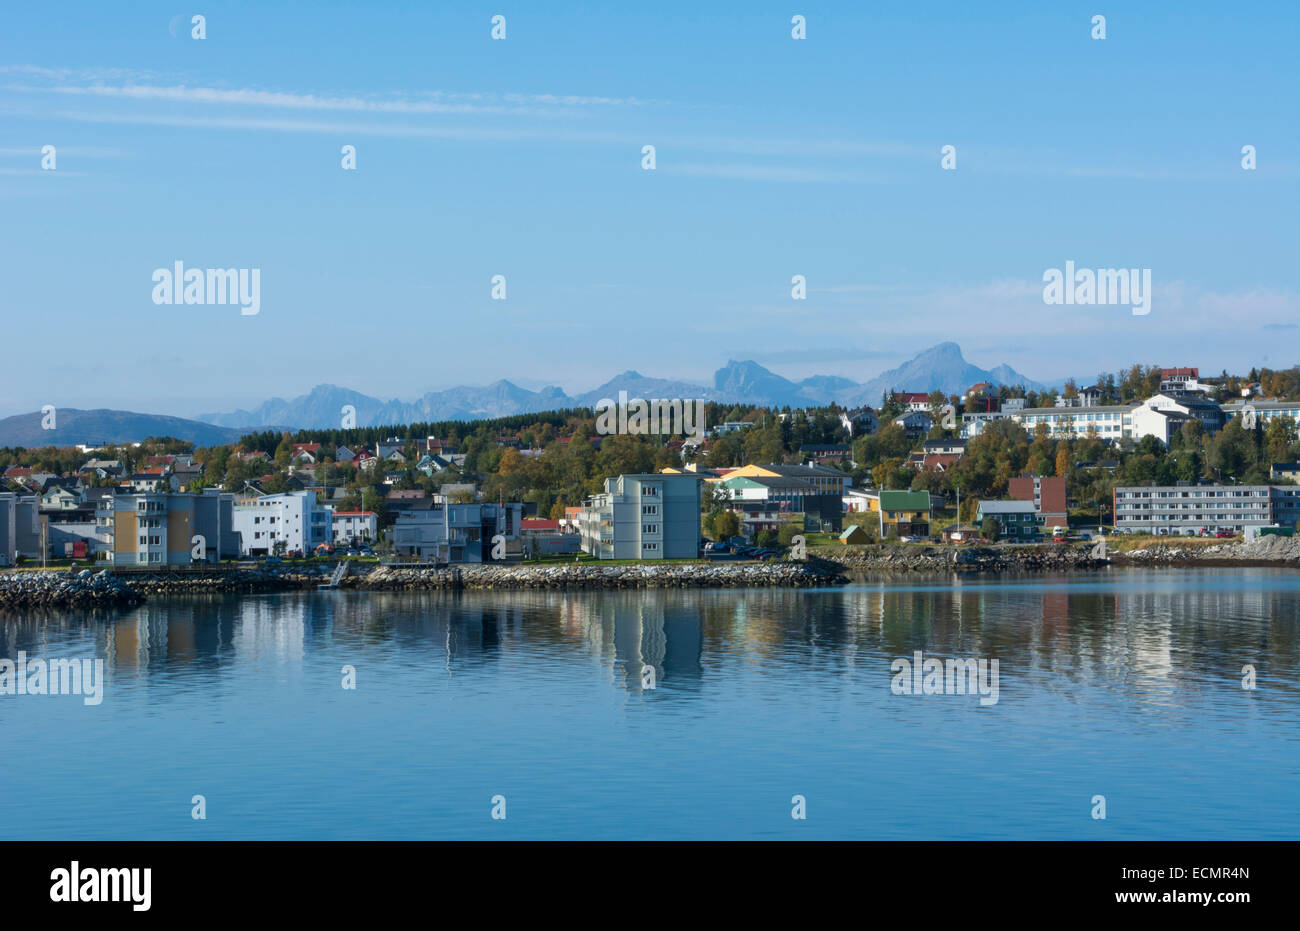 Finnsnes Norway cruise Hurtigruten town from water with colorful homes and harbors Stock Photo